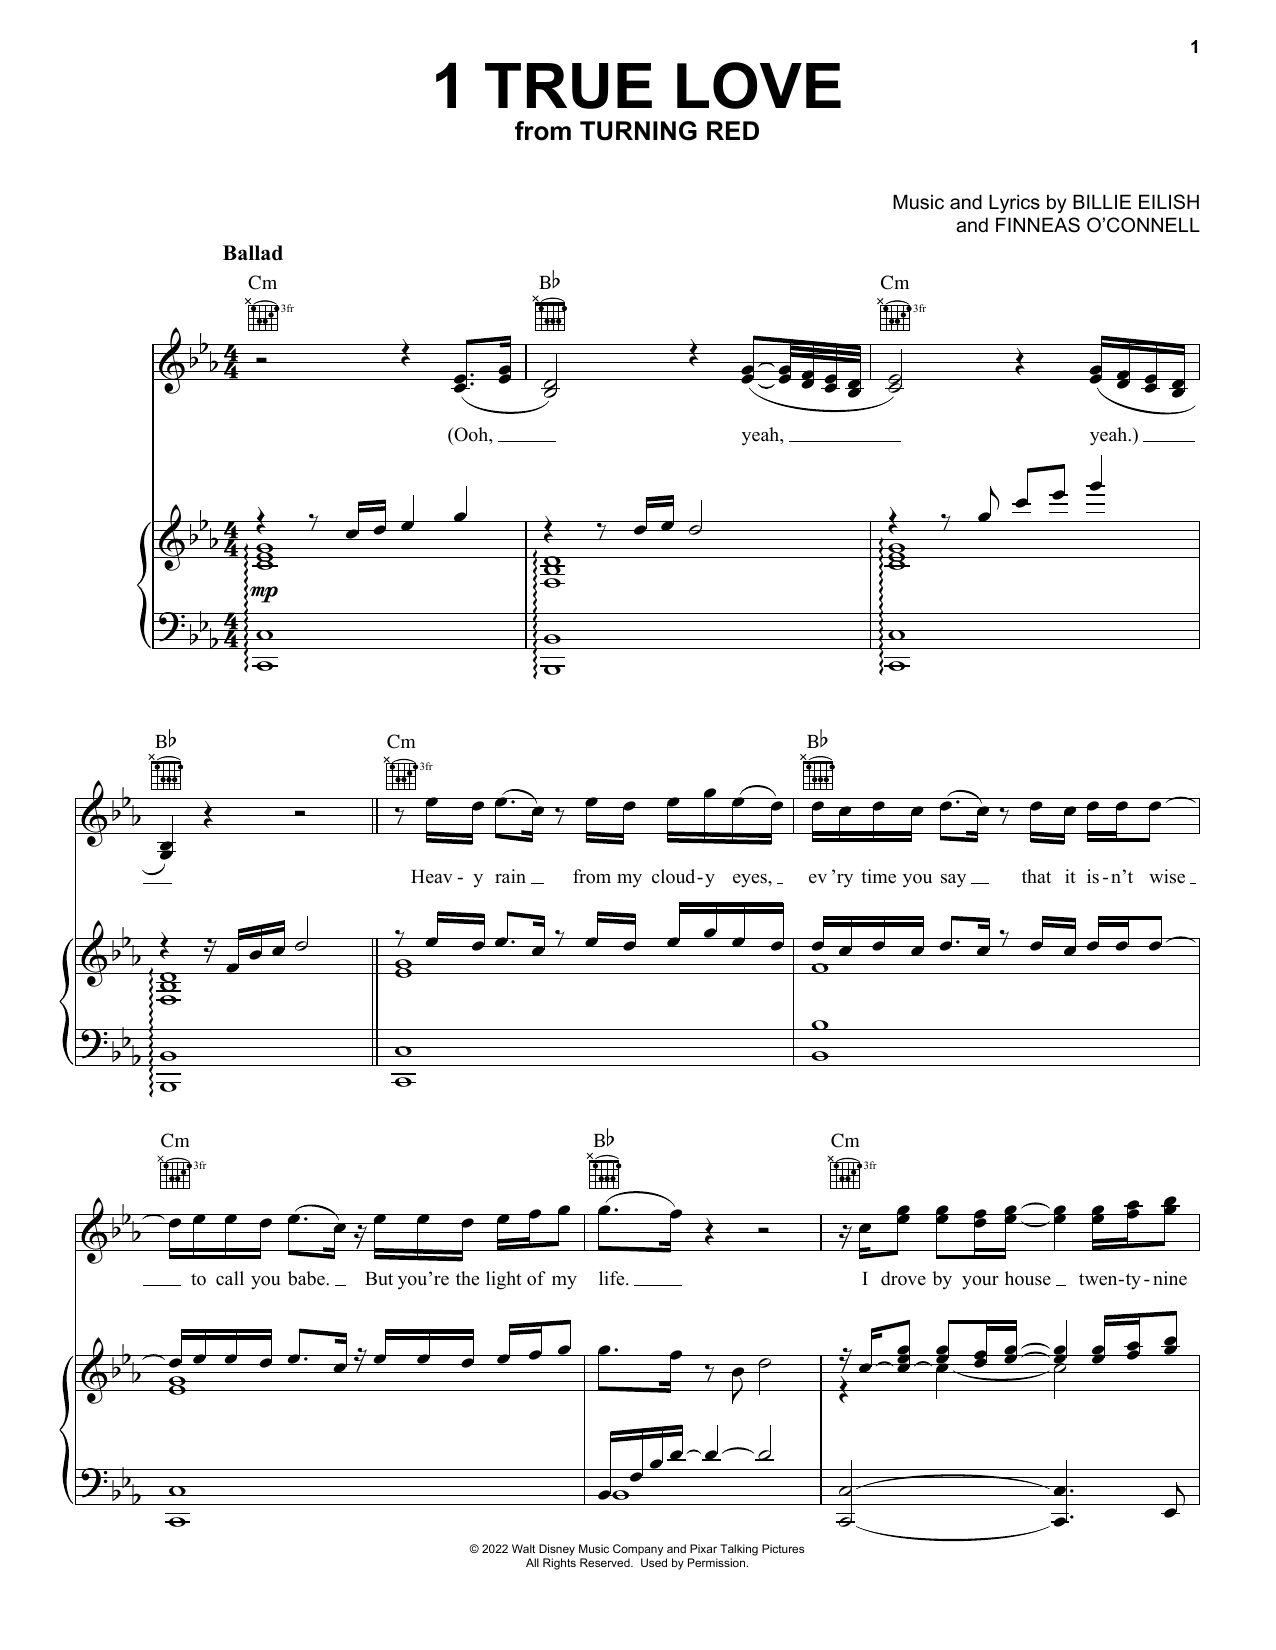 Download 4*TOWN 1 True Love (from Turning Red) Sheet Music